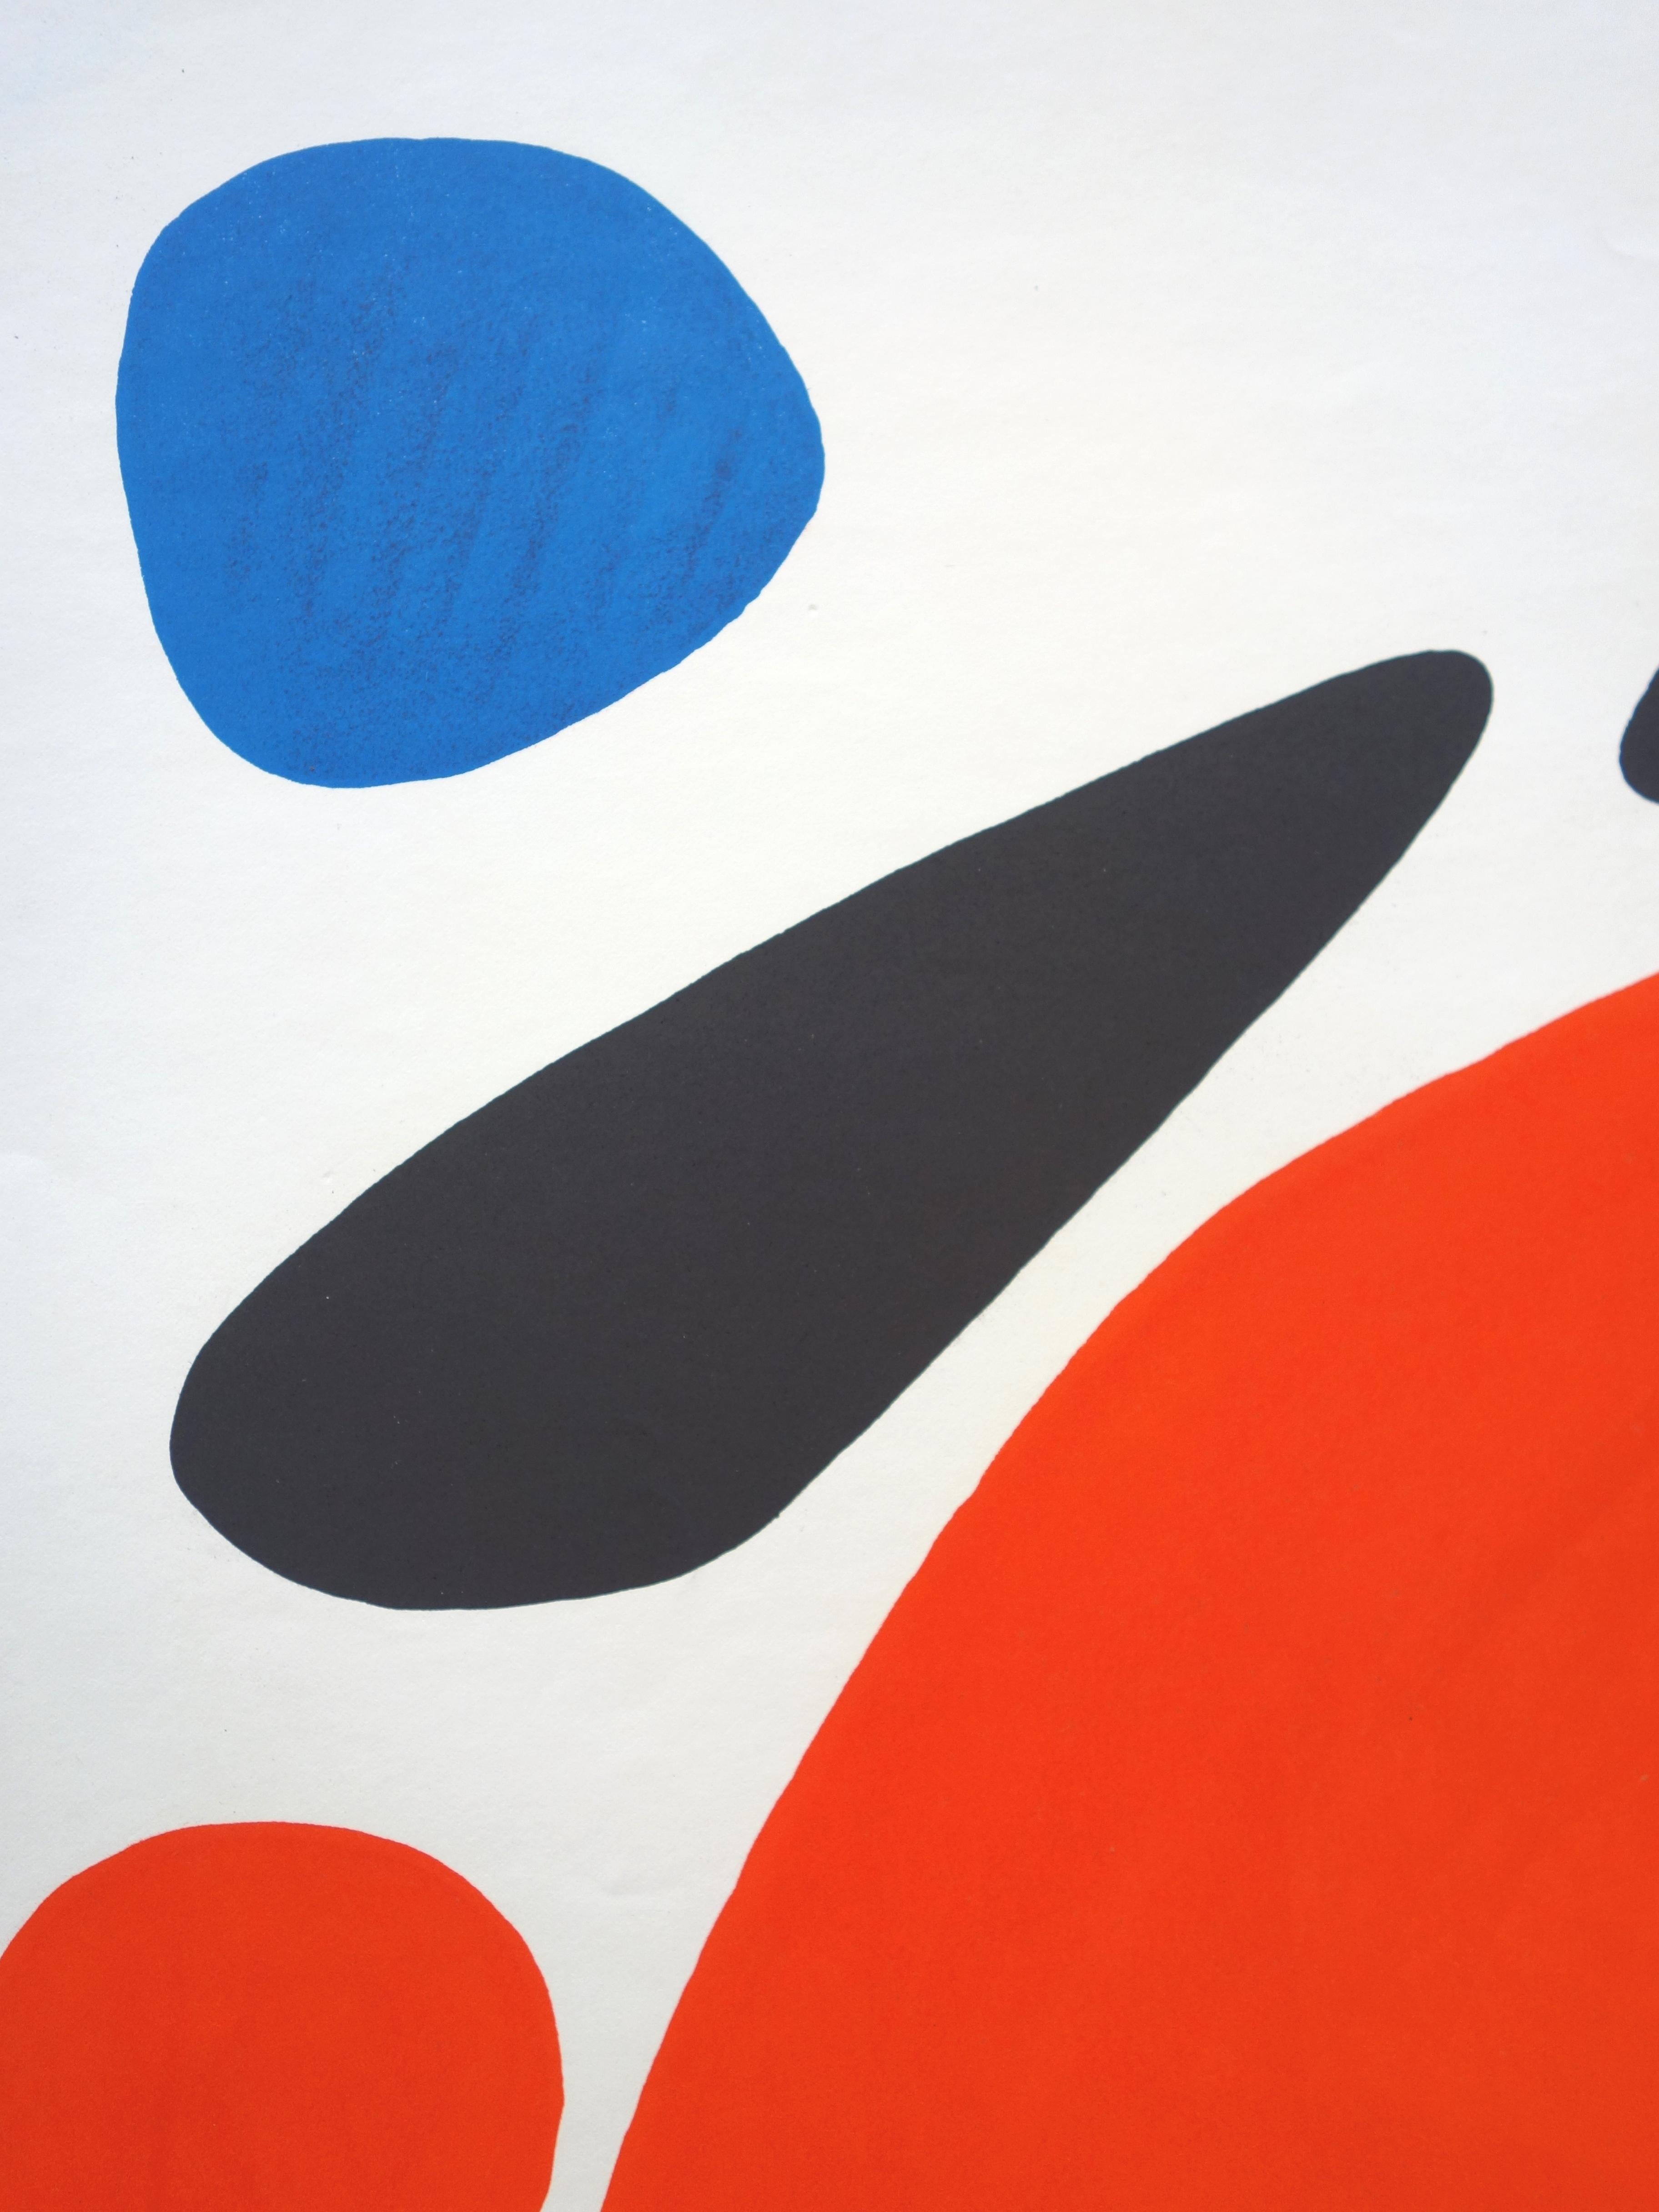 Colorful Abstract Elements - Exhibition Poster  - American Modern Print by Alexander Calder